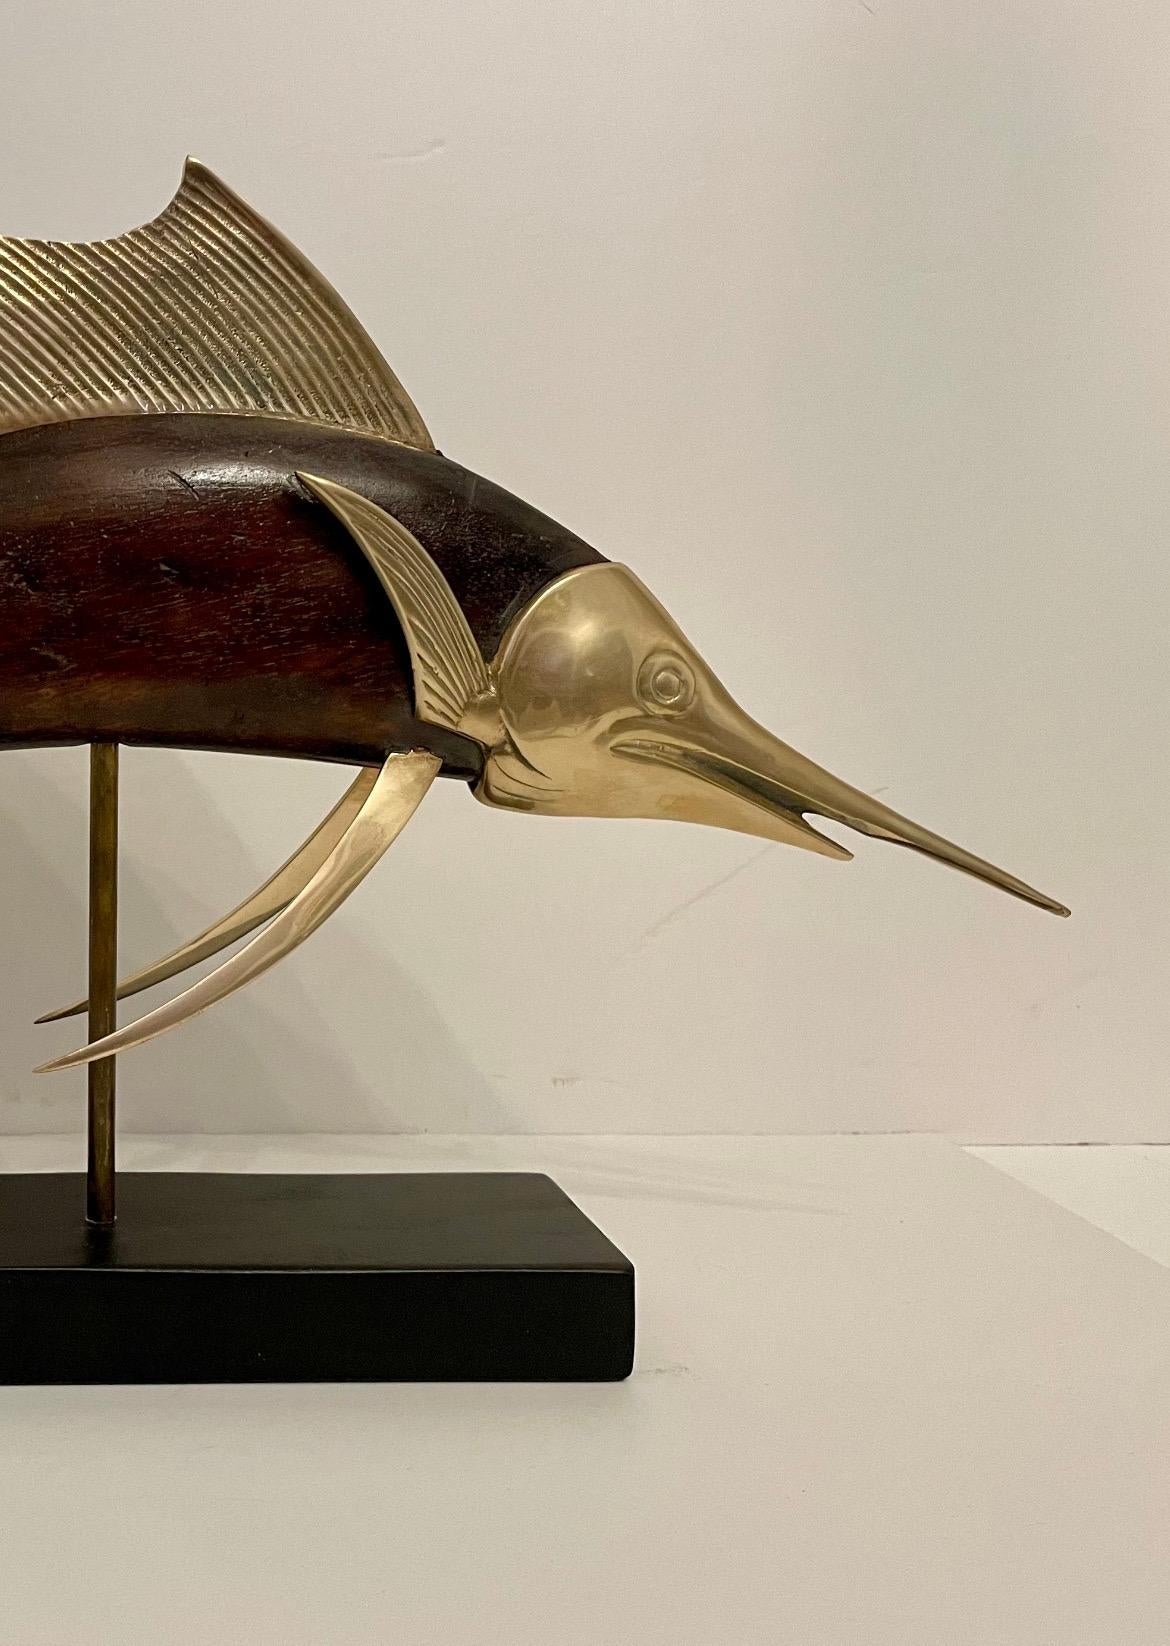 Large scale brass and mahogany full body sailfish sculpture mounted on a rectangular black wood base. By Frederick Cooper, circa 1950's-1960's. Good overall condition with some wear to finish from age and use. Some patina on brass